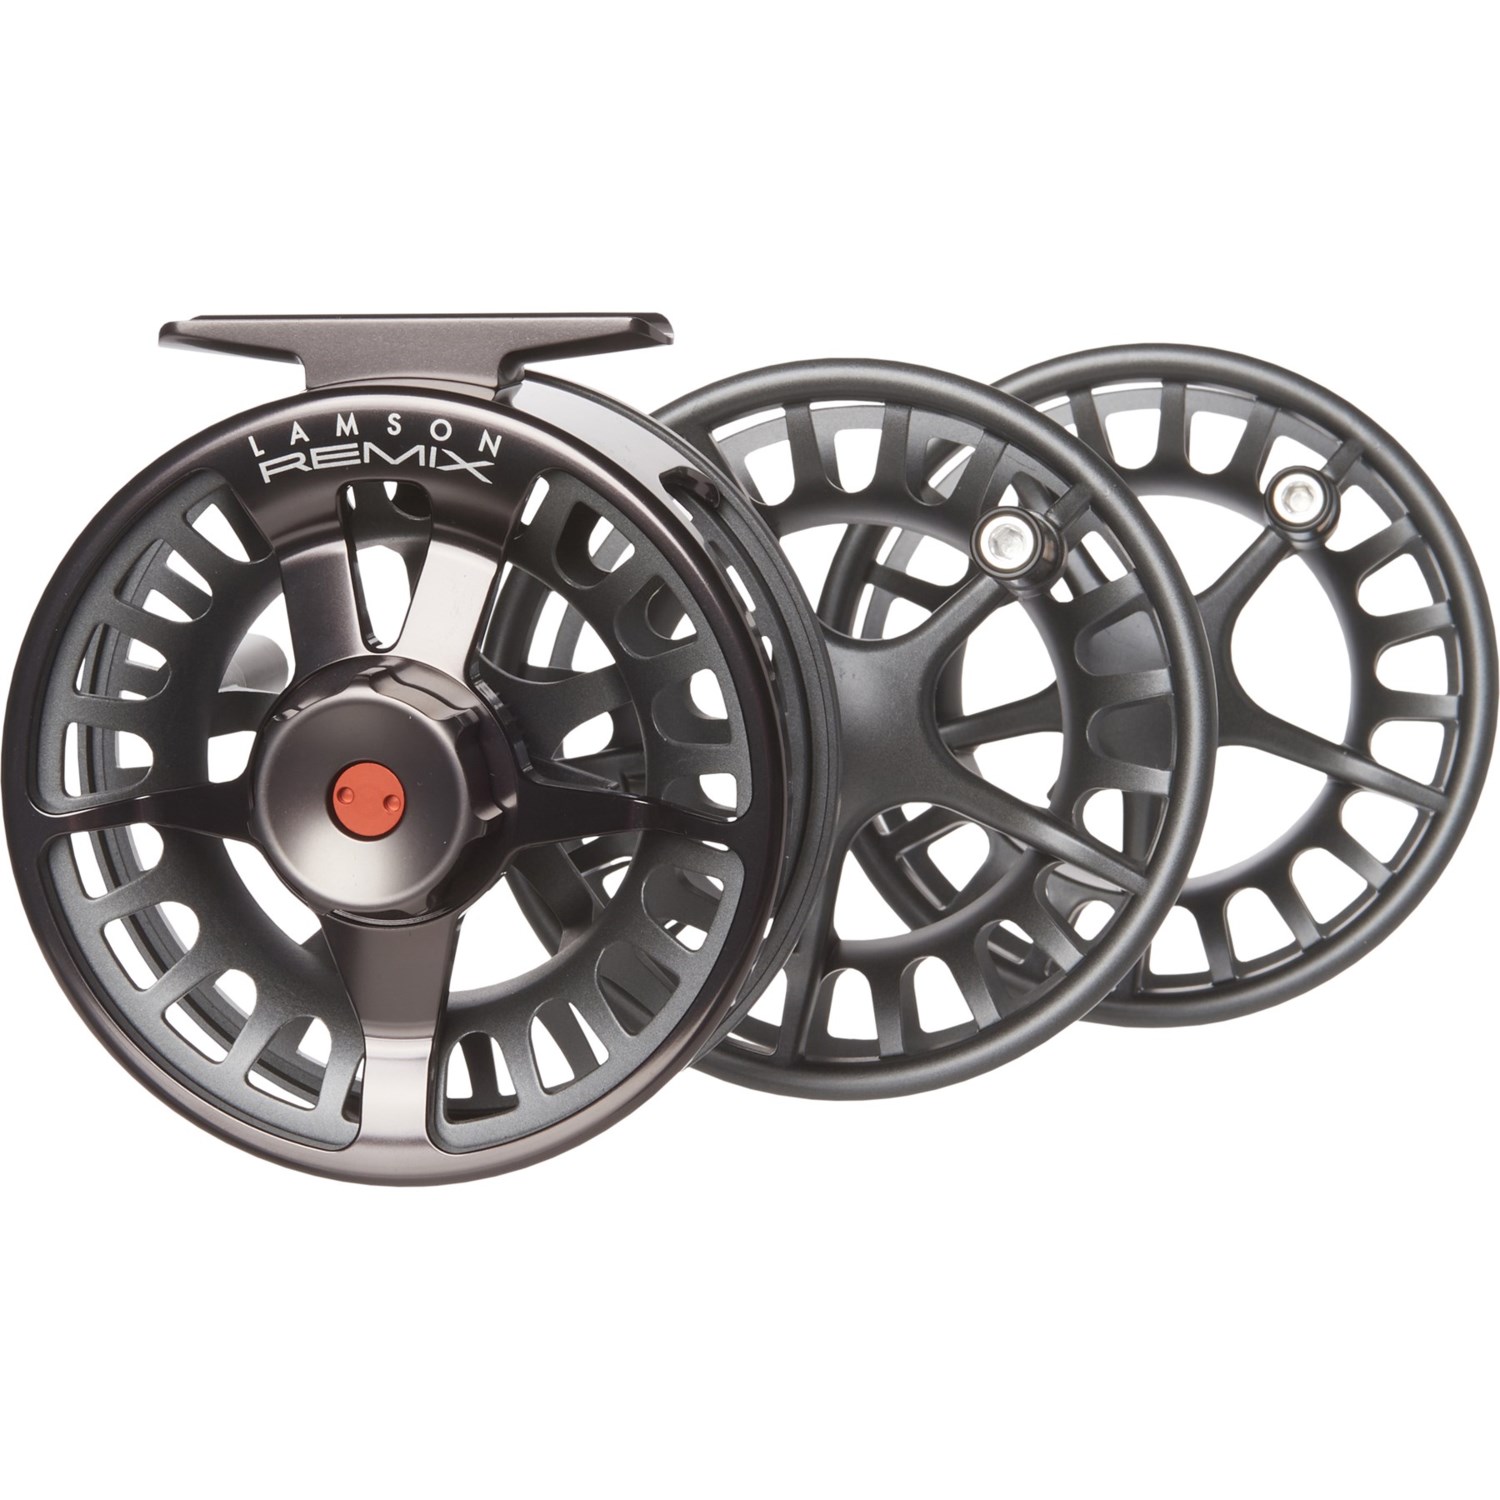 Lamson Remix -5+ Freshwater Fly Reel - 3-Pack - Save 33%